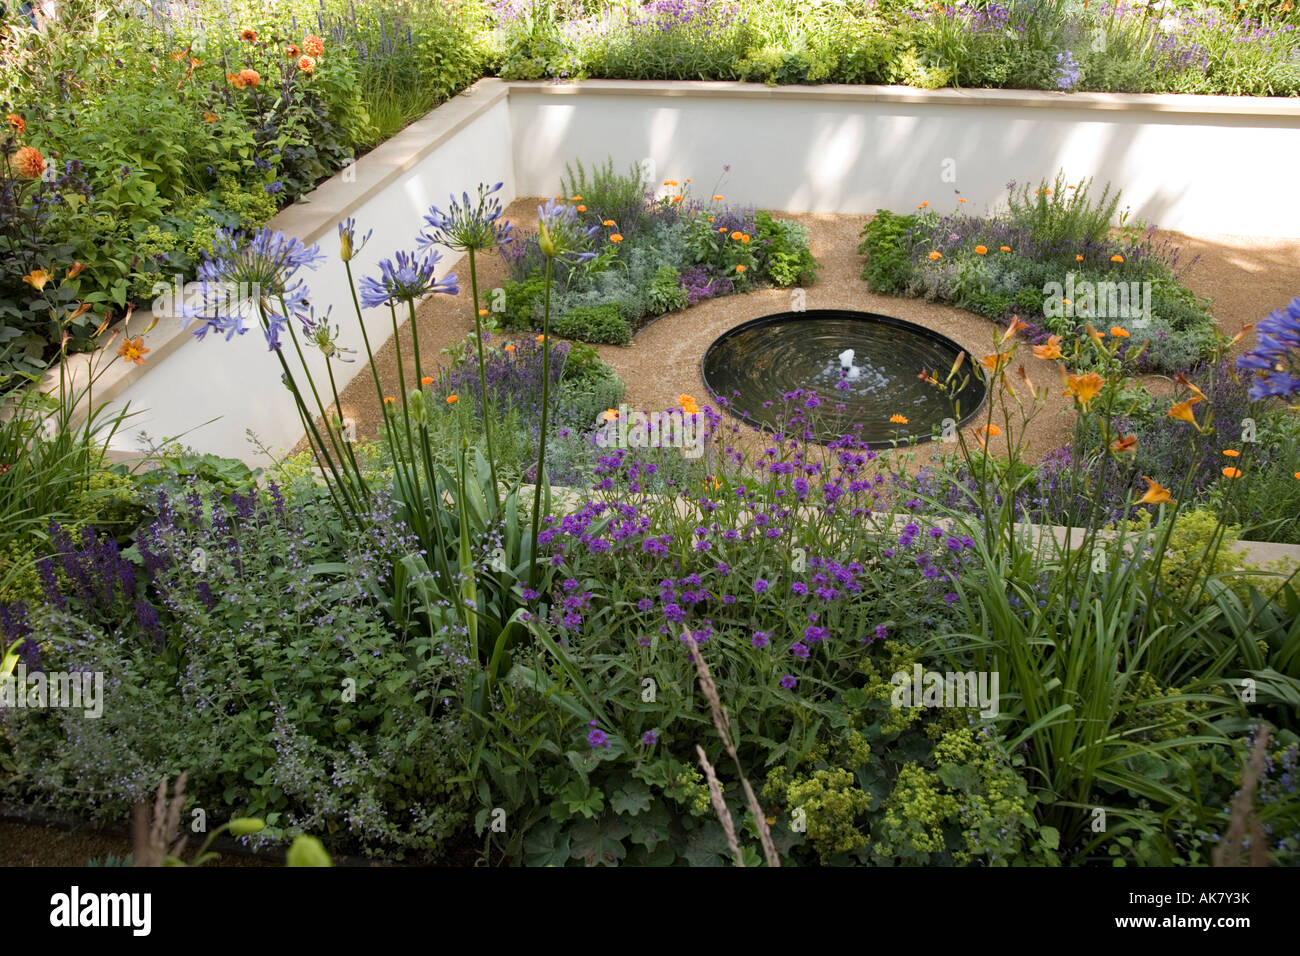 Pictures of the Homebase Reflection garden designed by Thomas Hoblyn at the Hampton Court Flower Show Stock Photo